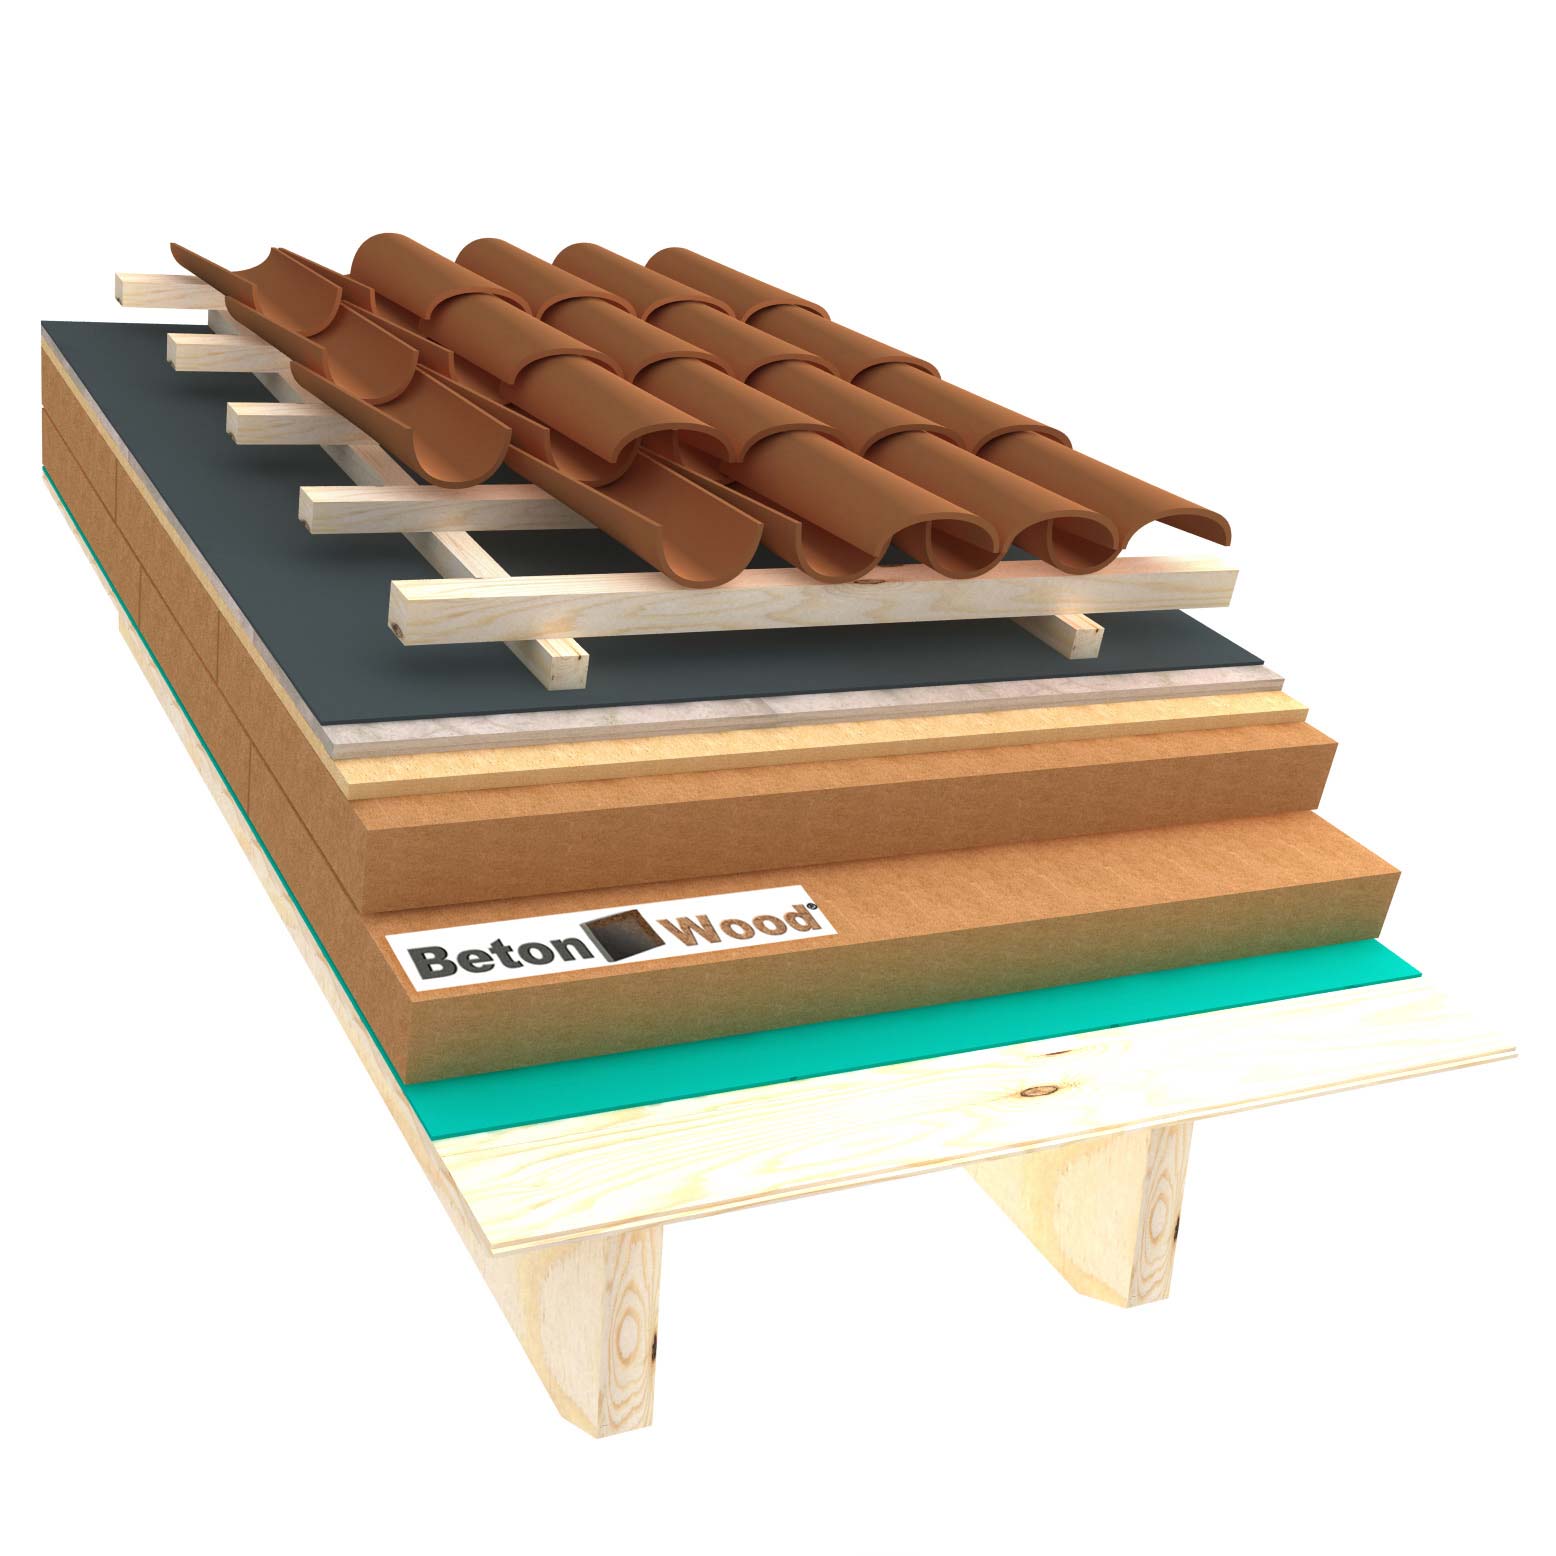 Ventilated roof with wood fiber Isorel, Special and cement bonded particle boards on matchboarding